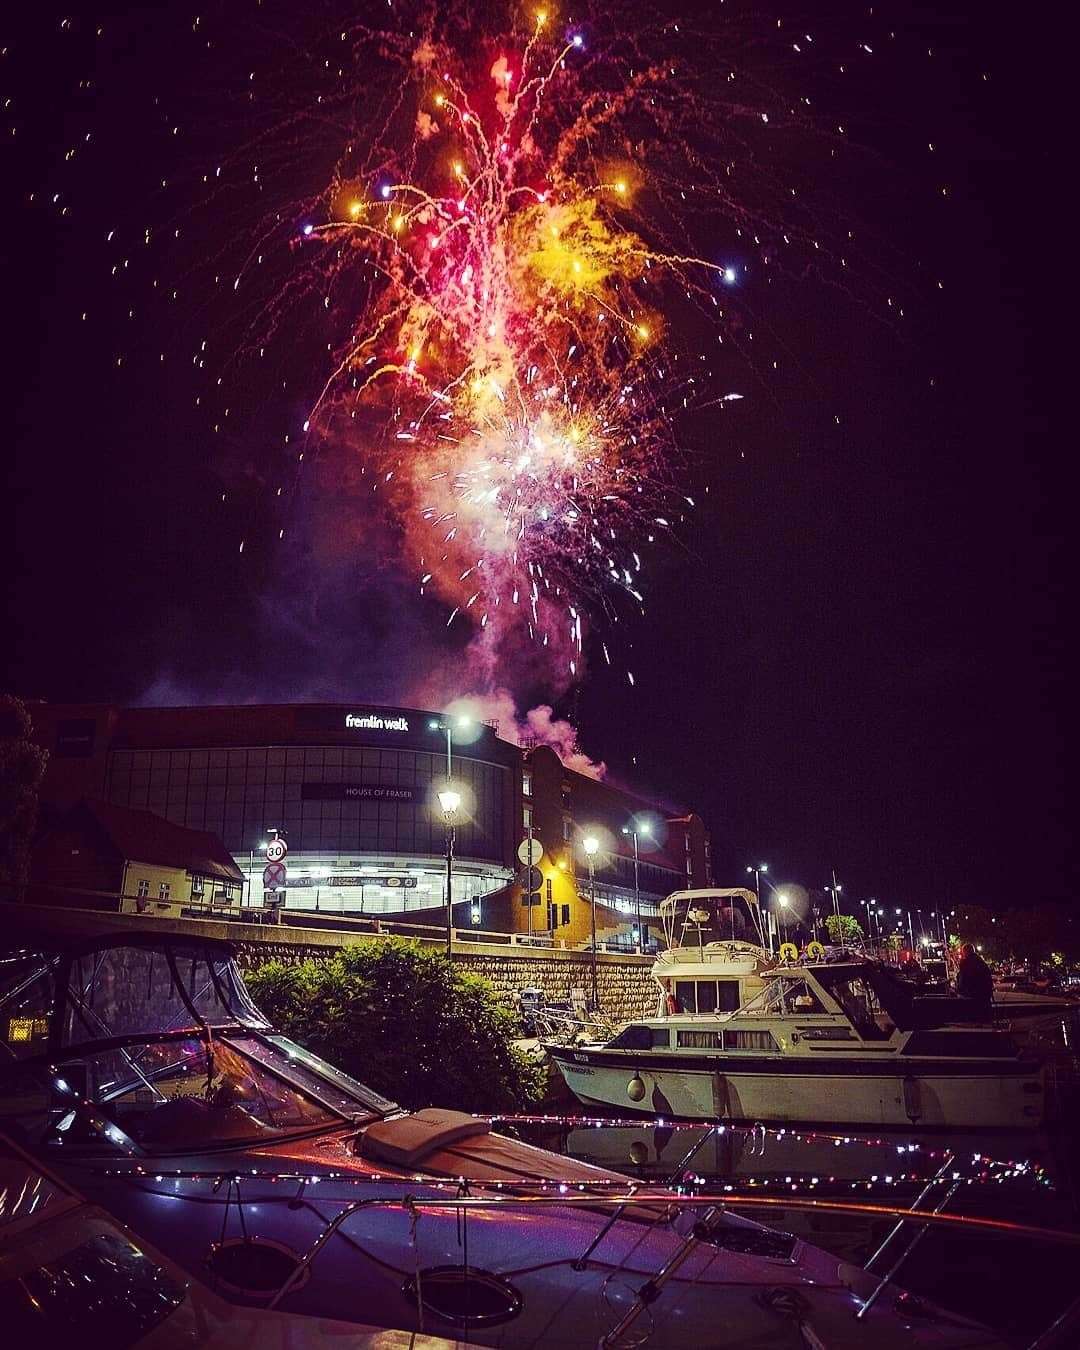 The firework display at Maidstone River Festival